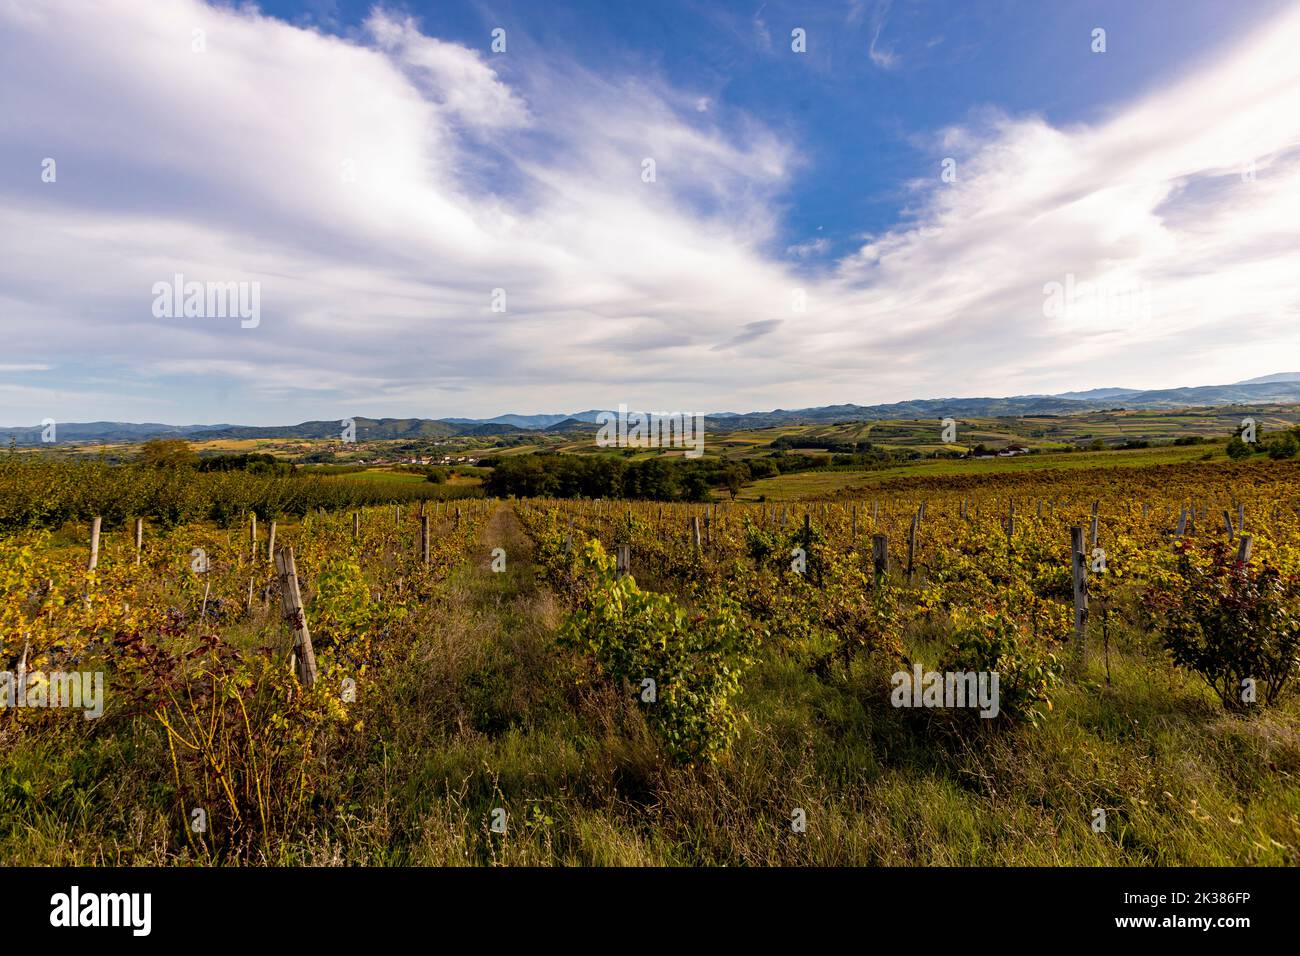 View at vineyards in the Zupa Aleksandrovac, Serbia Stock Photo